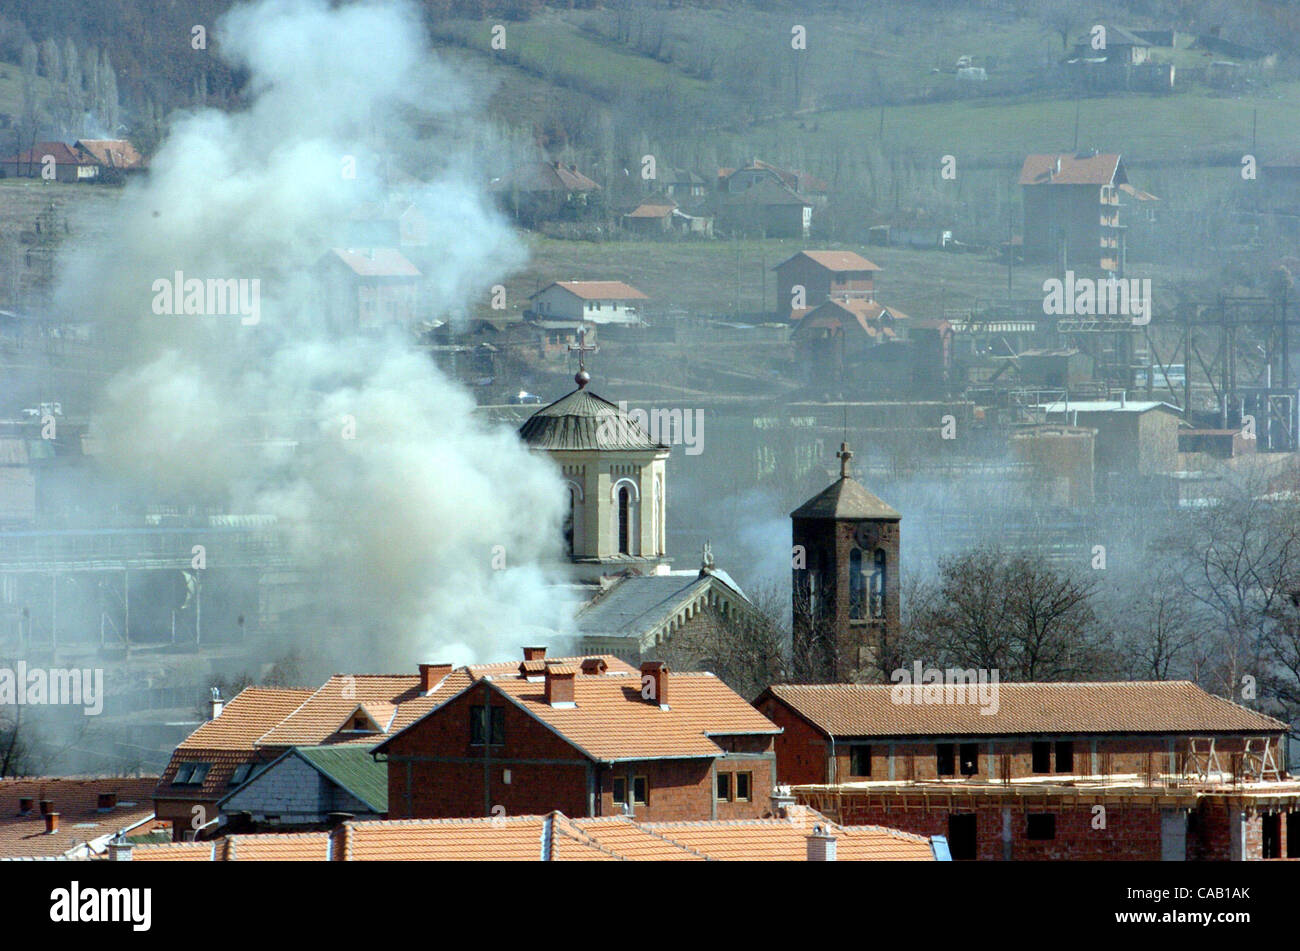 Mar 22, 2004; Kosovo, SERBIA; The Serb Orthodox Church of St. Sava burns after being set on fire by angry Kosovo Albanian protesters, in the South part of Kosovska Mitrovica. The worst ethnic violence since the 1998-1999 Kosovo war erupted here and spread to other parts of the troubled province in s Stock Photo